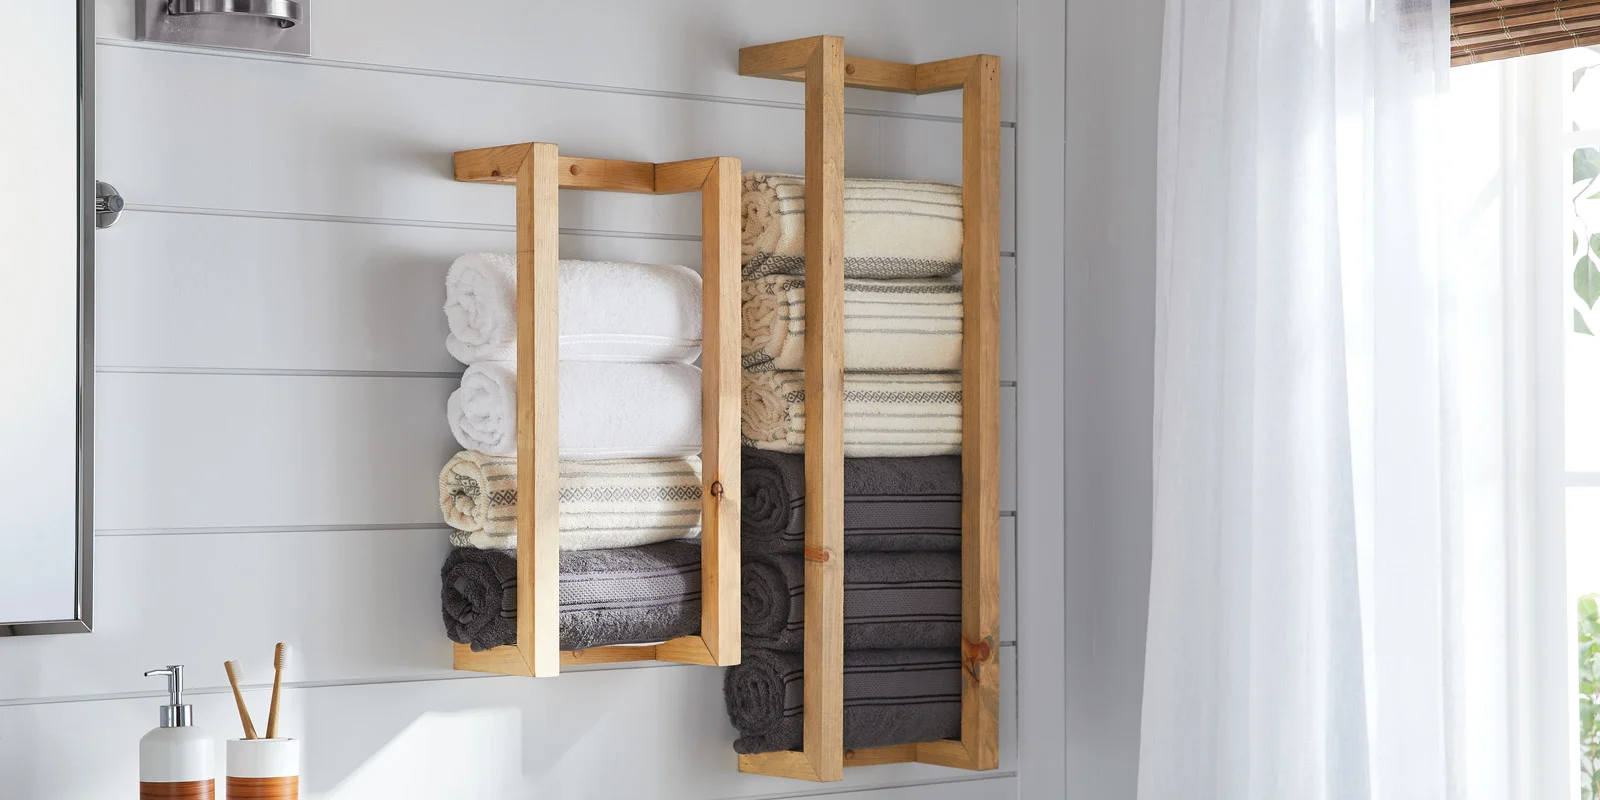 Here's How to Make a Rustic Towel Rack